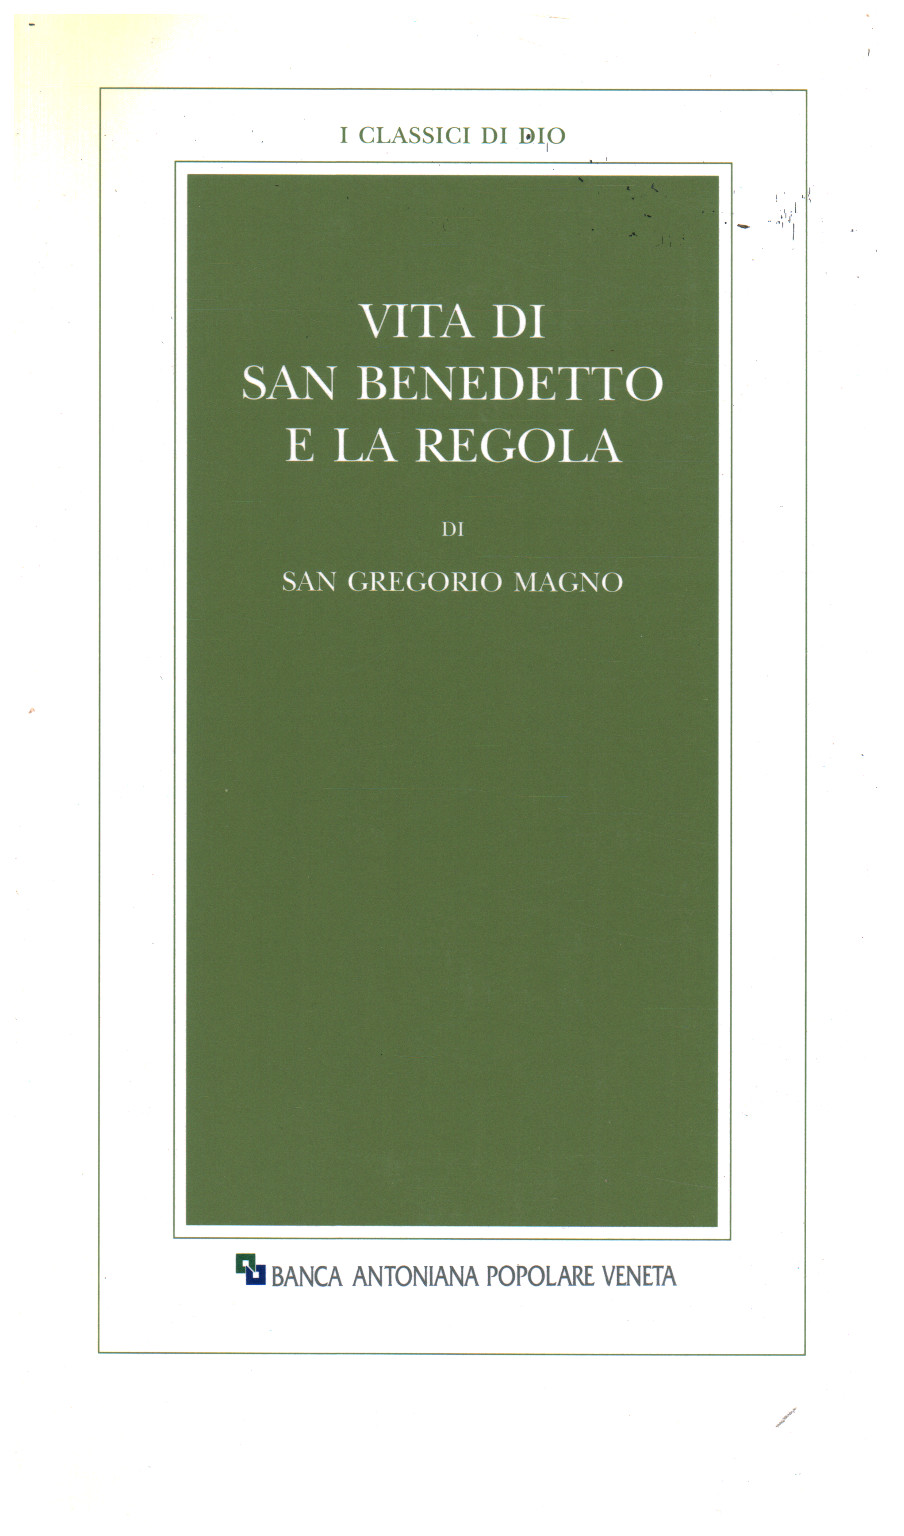 The life of St. Benedict and the rule, s.a.